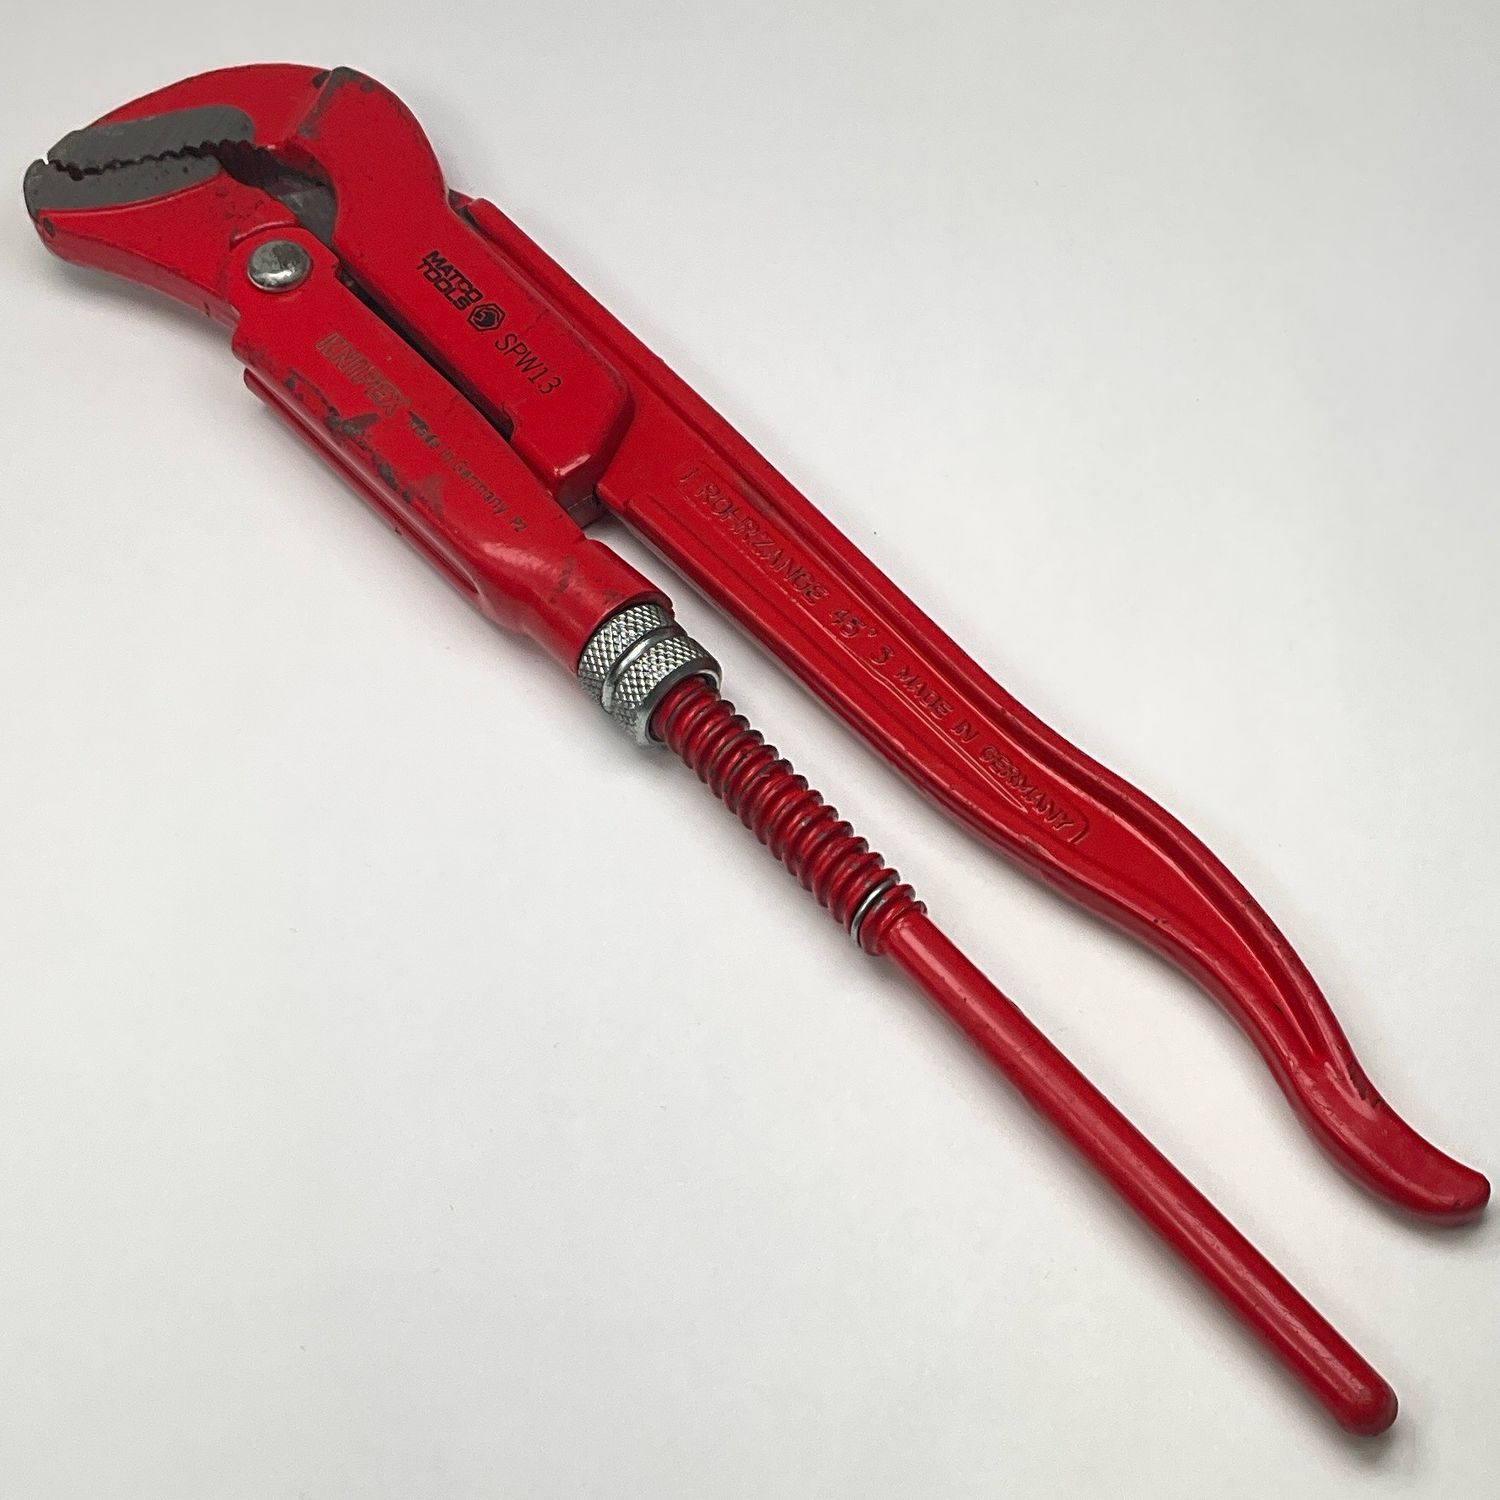 Matco/Knipex 13" S-Shaped Swedish Pipe Wrench, SPW13